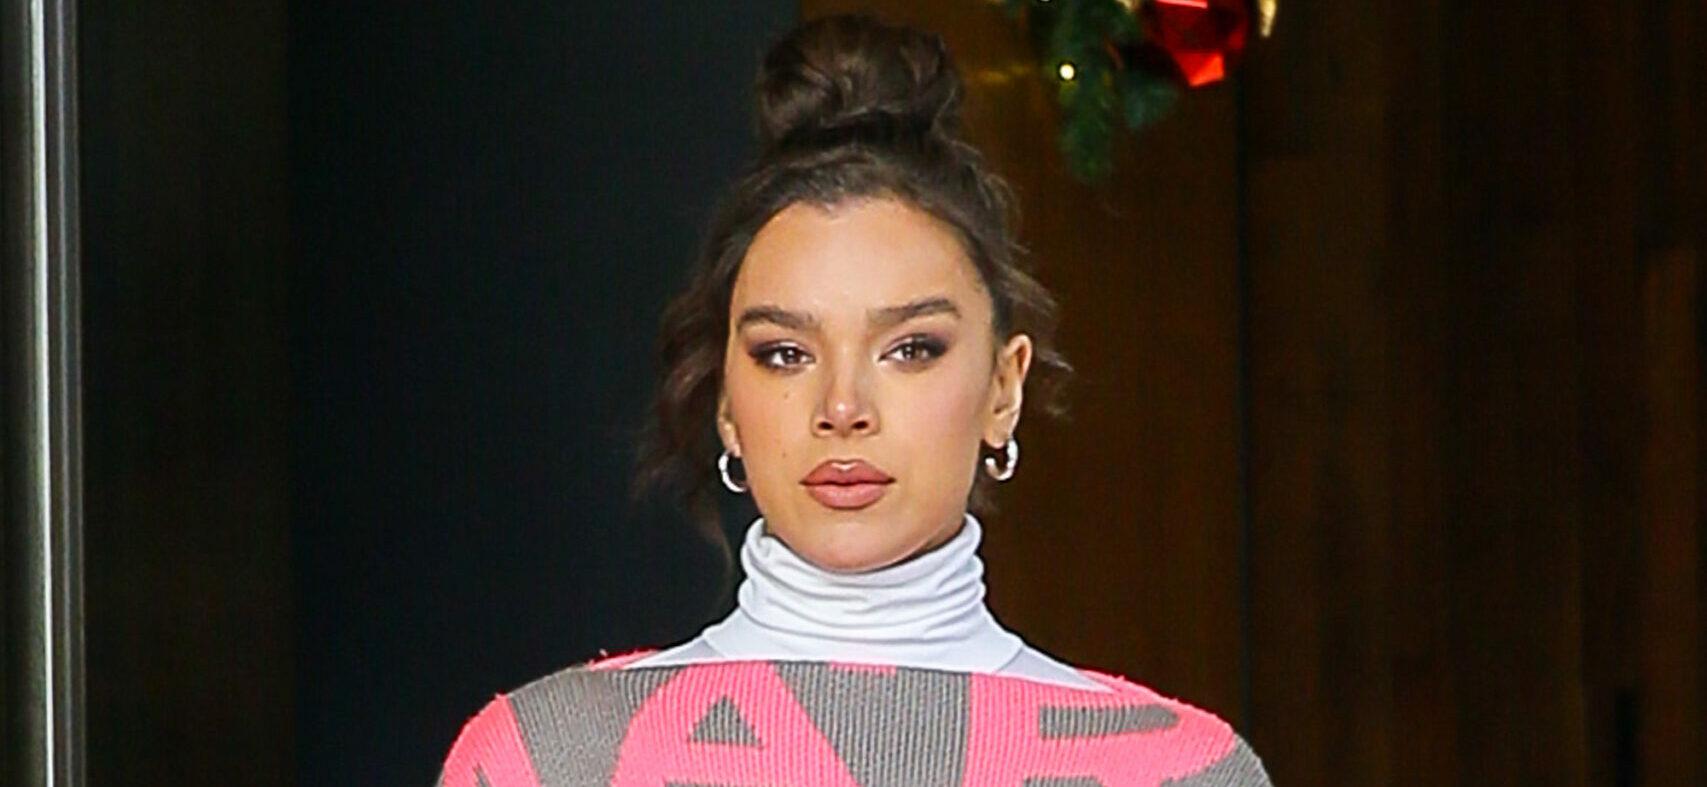 Hailee Steinfeld wears a Marc Jacobs outfit as leaving her hotel in NYC